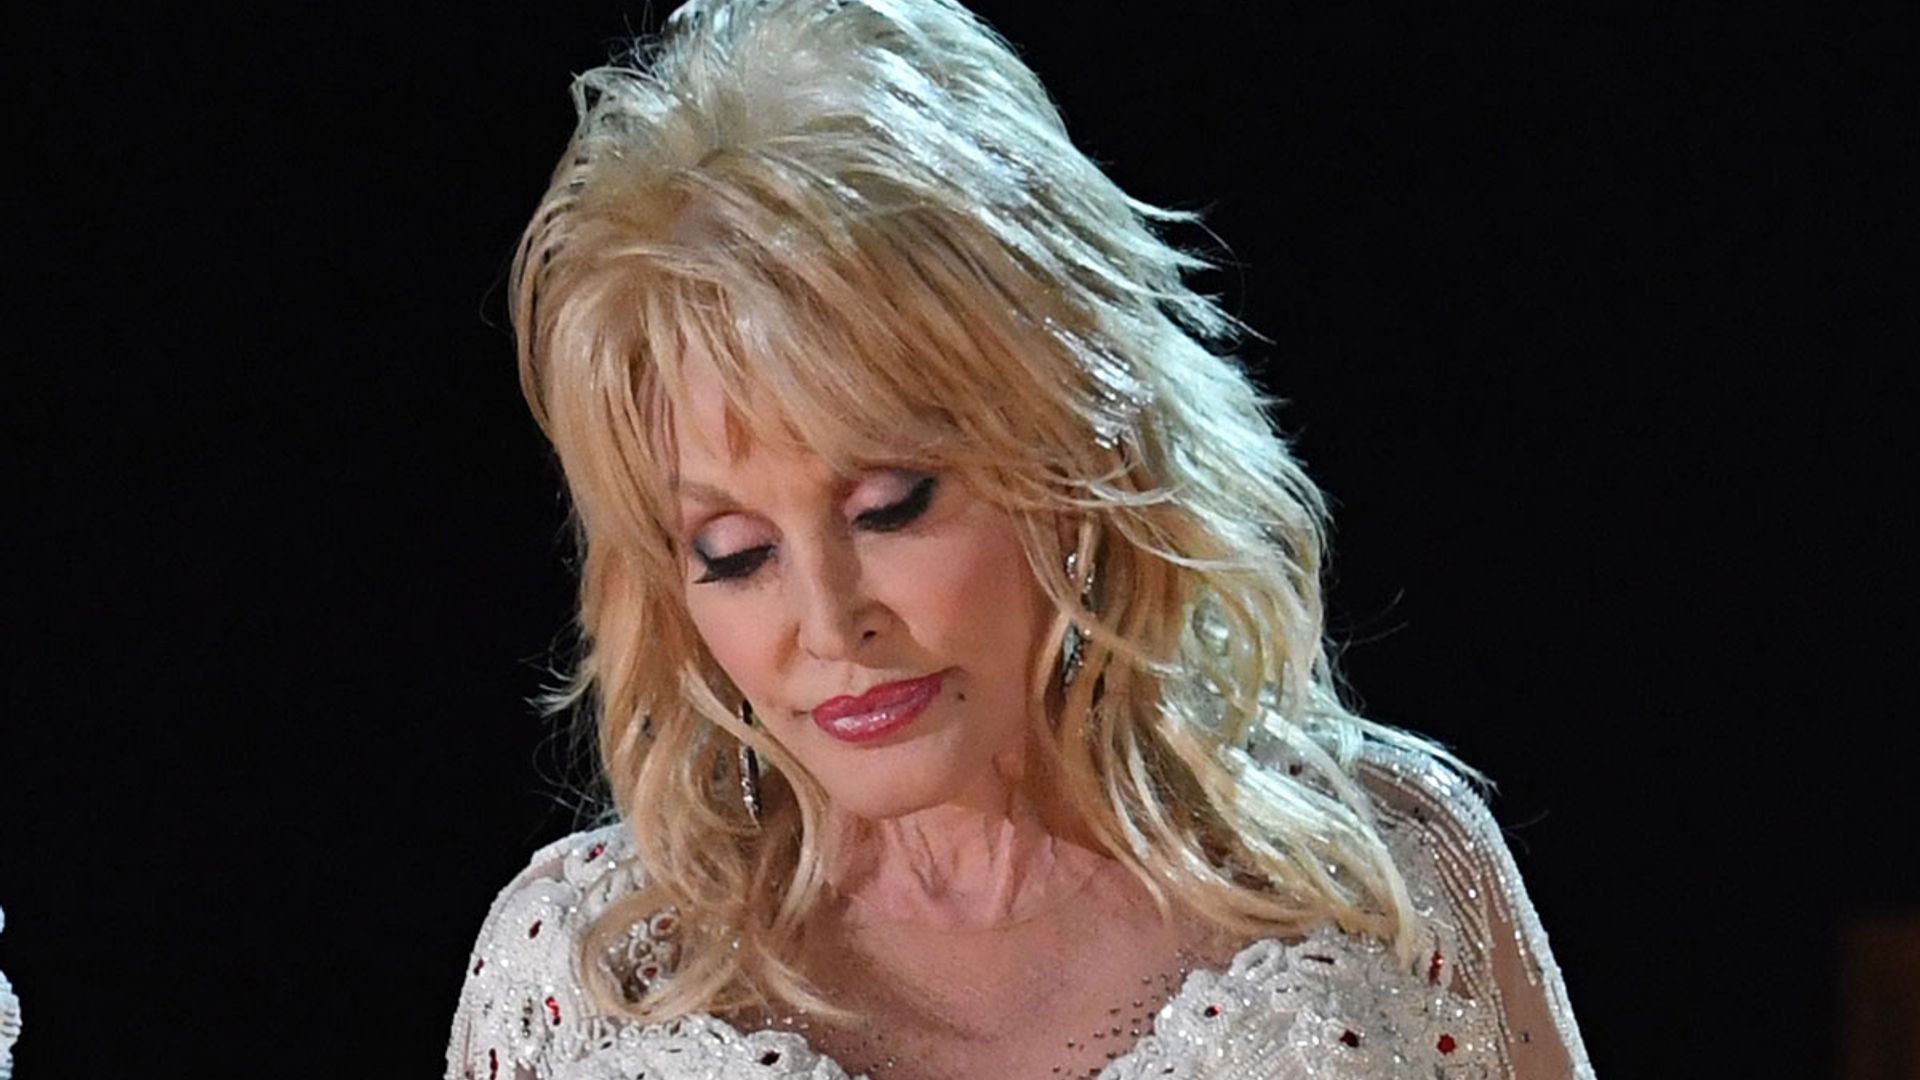 Dolly Parton shares heartbreak after sad loss: 'I will always love you'